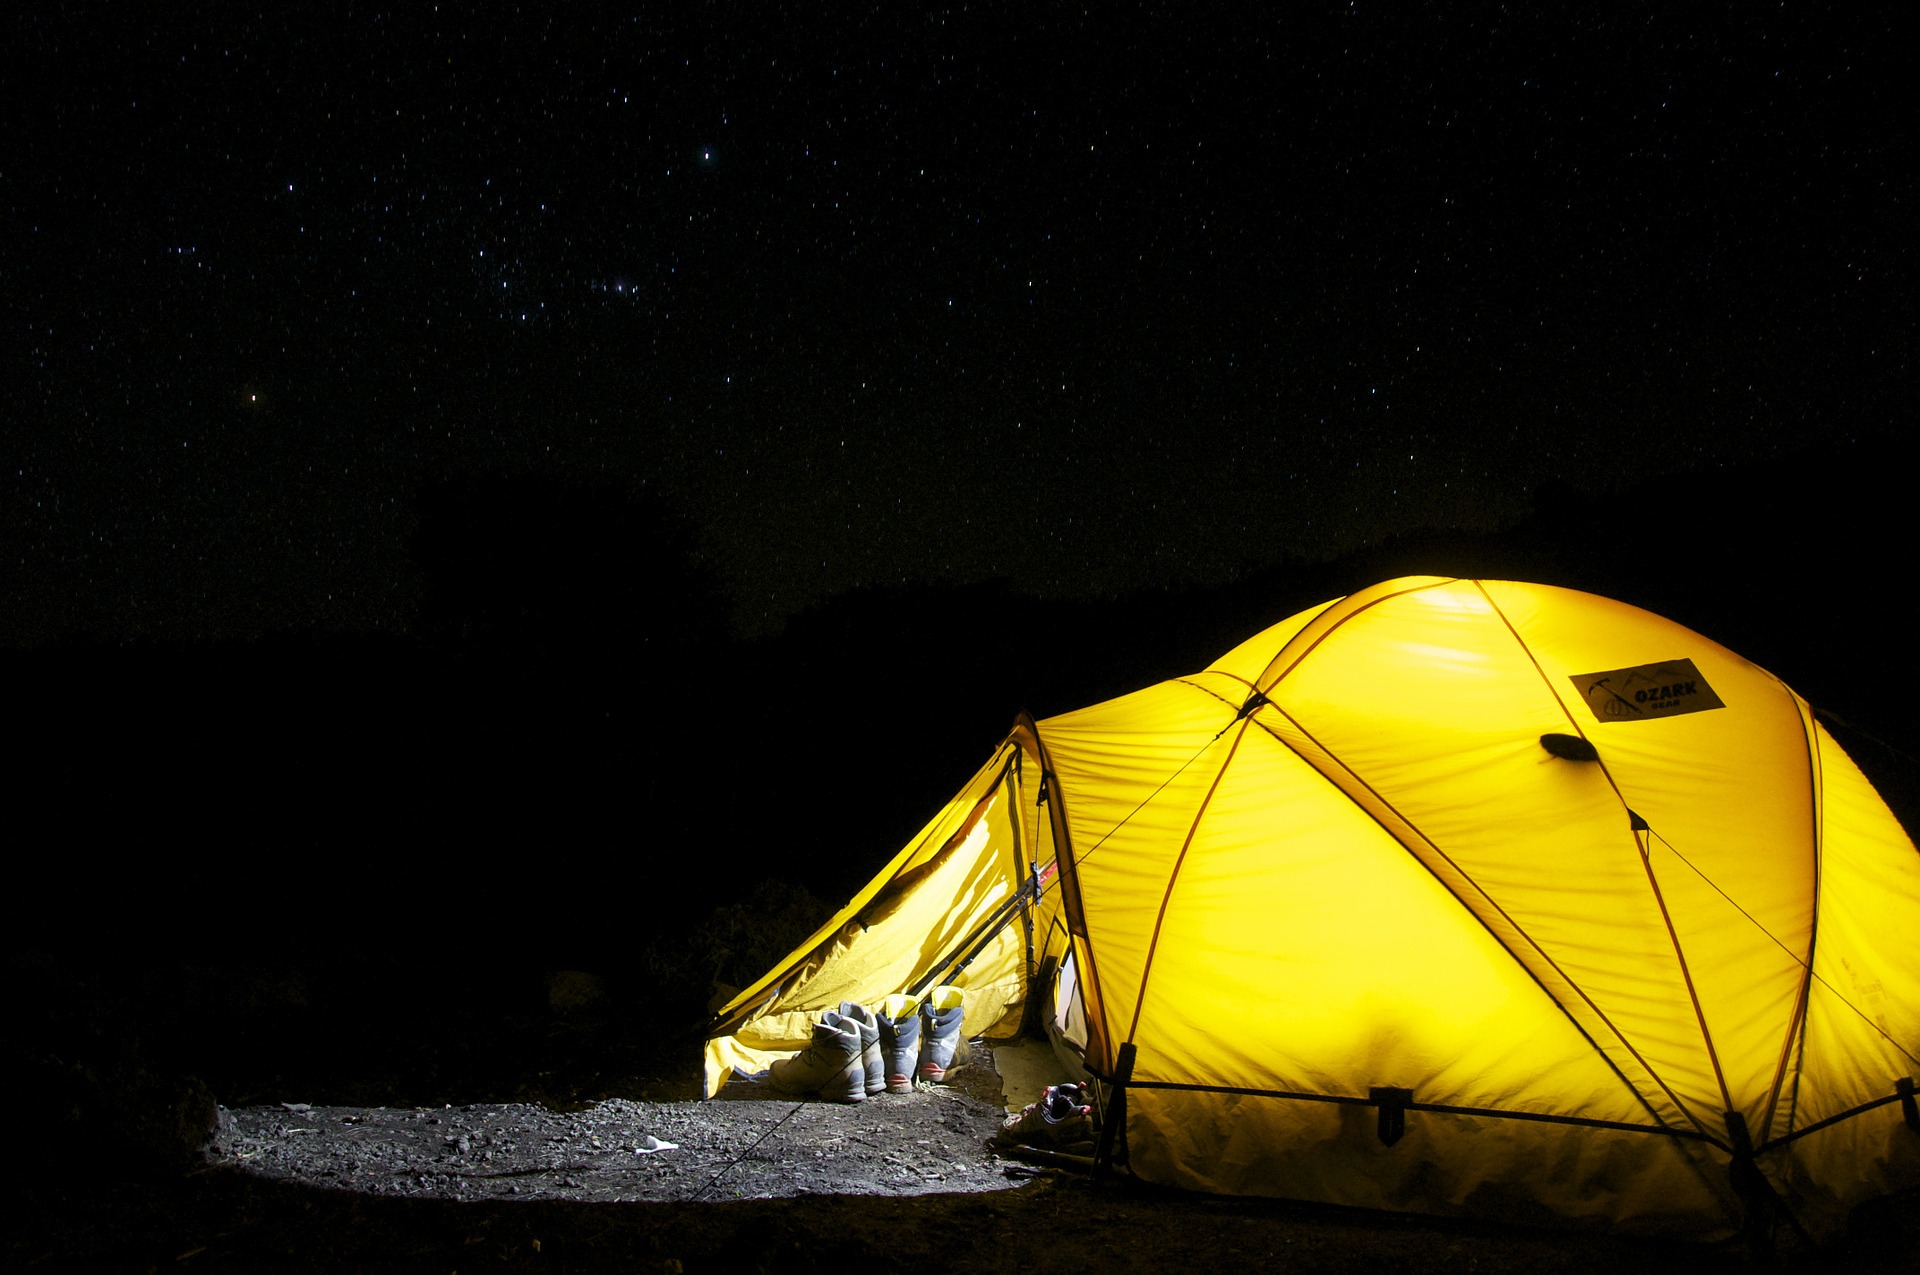 A camping tent underneath the night sky